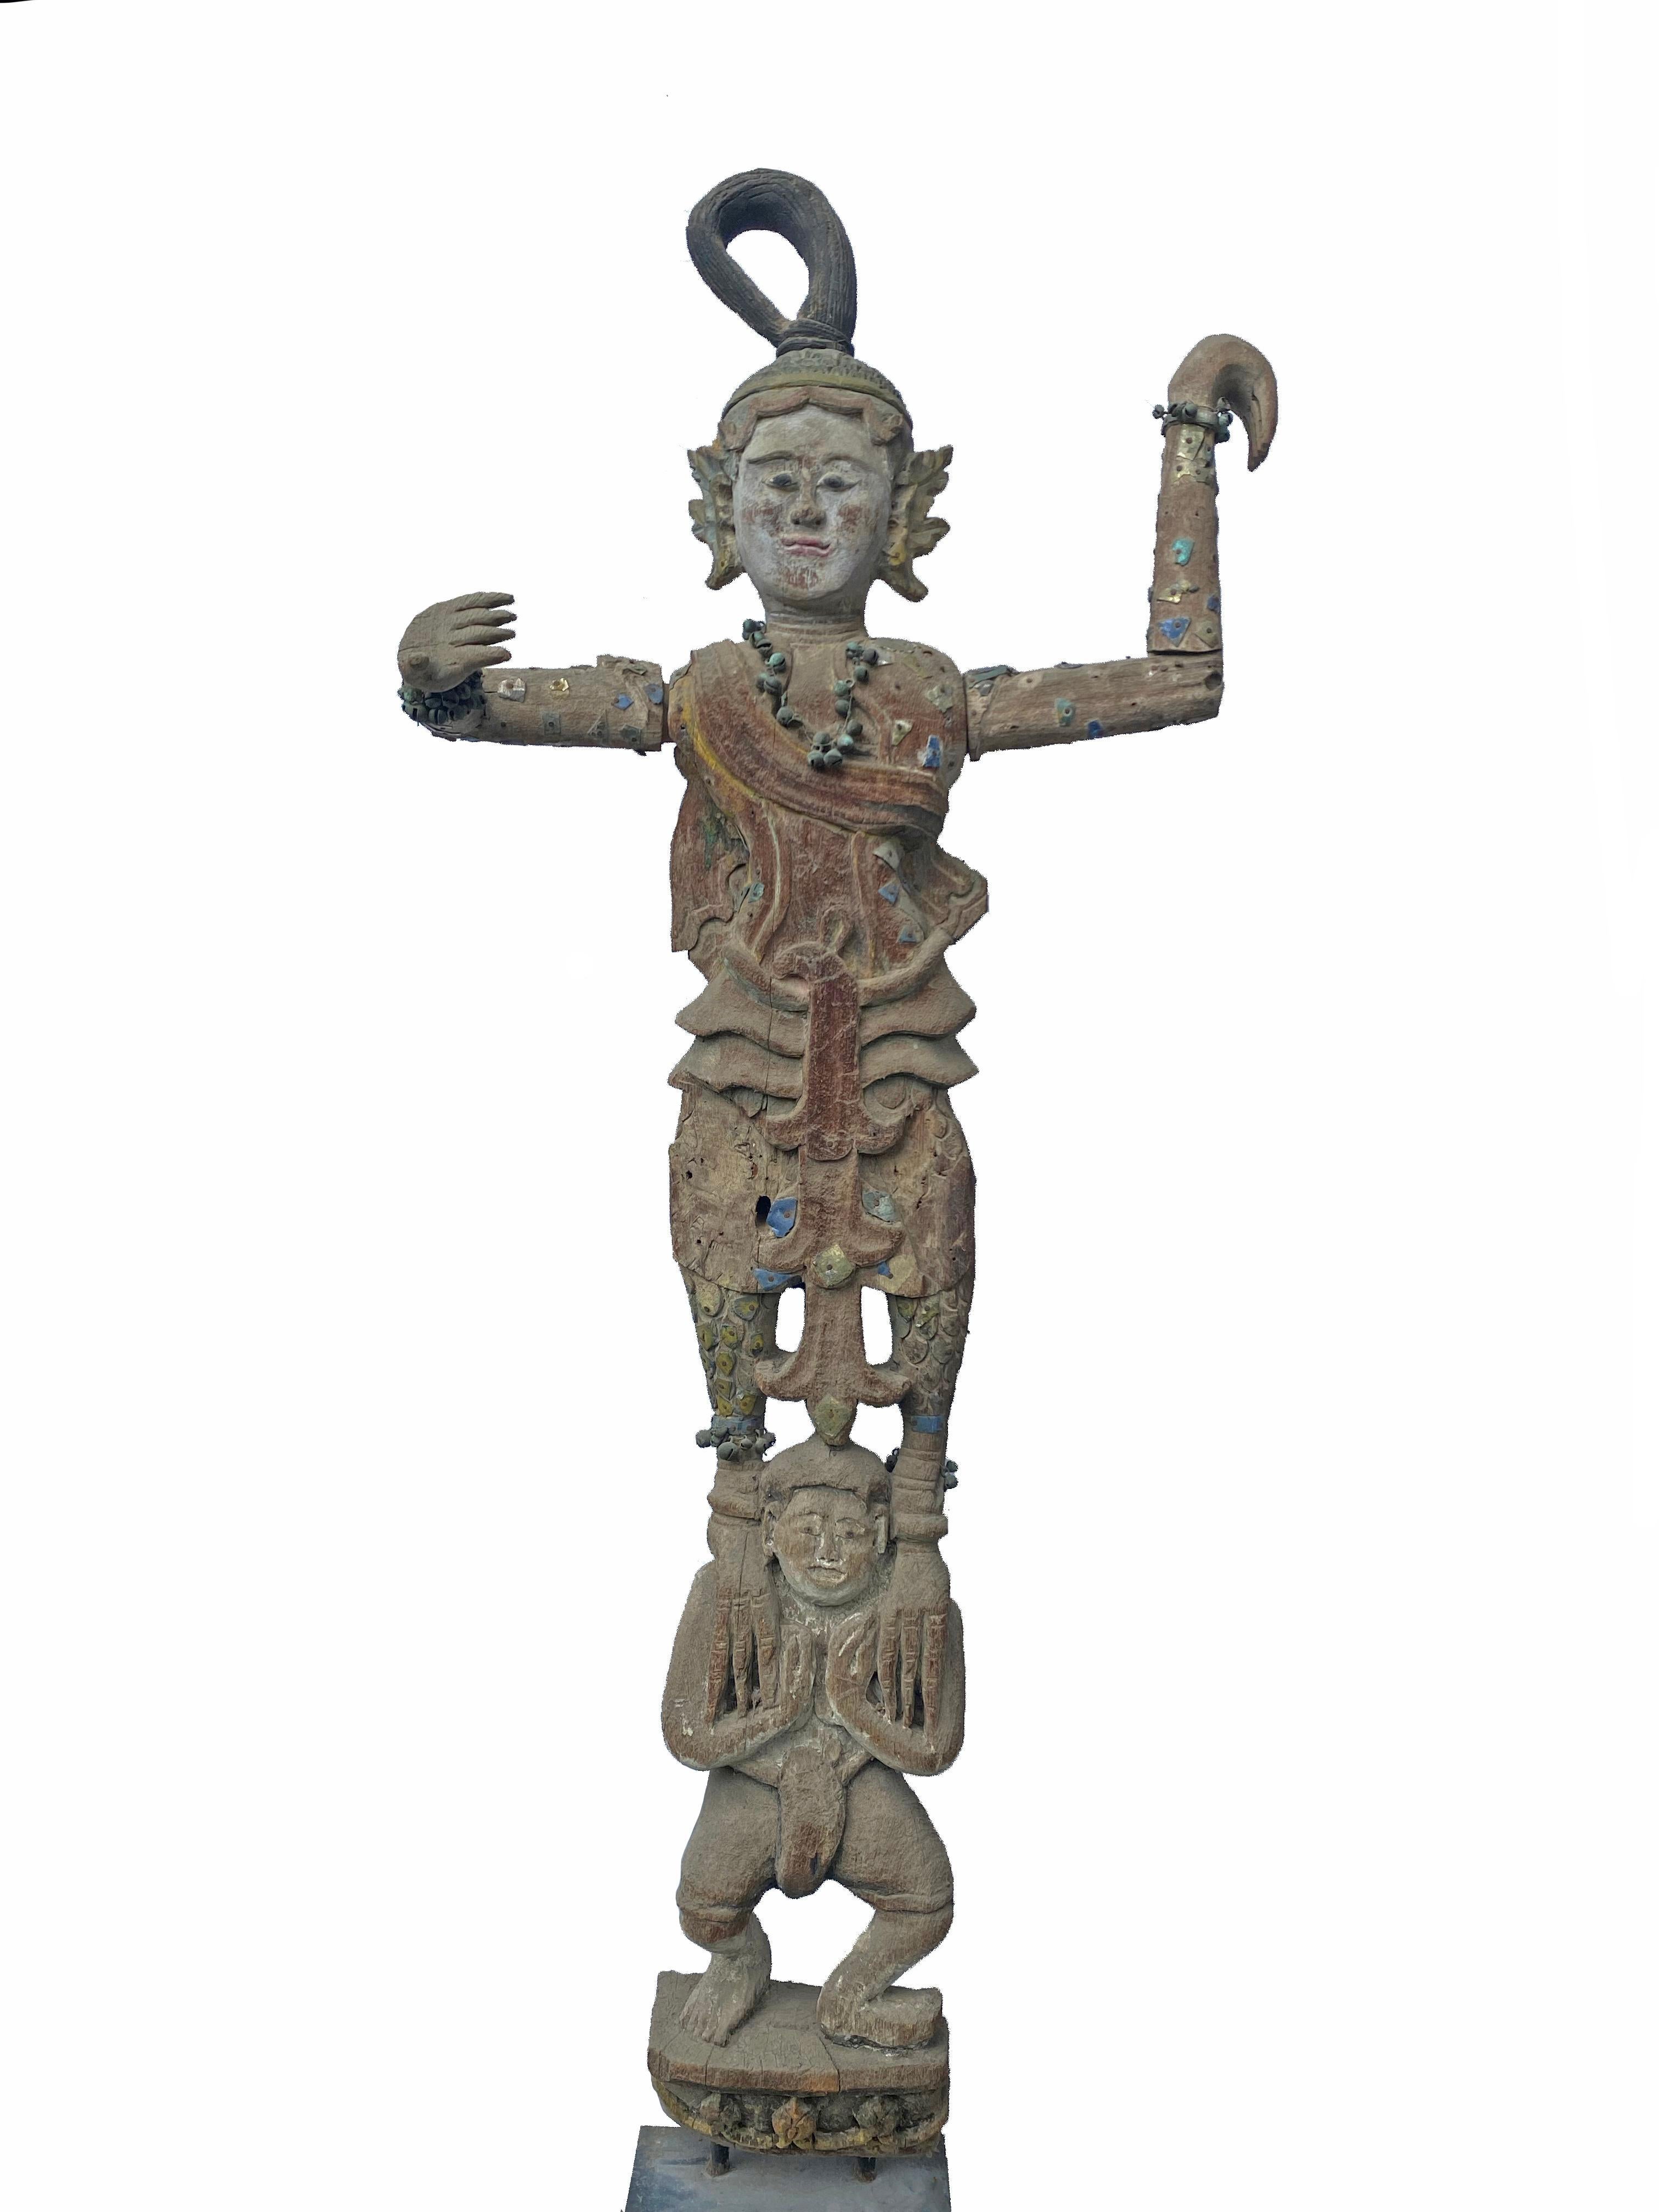 These statues are adorned wood-carved Burmese Mandalay 'Nat' Spirits from the early 20th century. Nats were worshipped by the Burmese people, depicted as supernatural guardians they offer protection and help to counter evil. Carved of teak they are